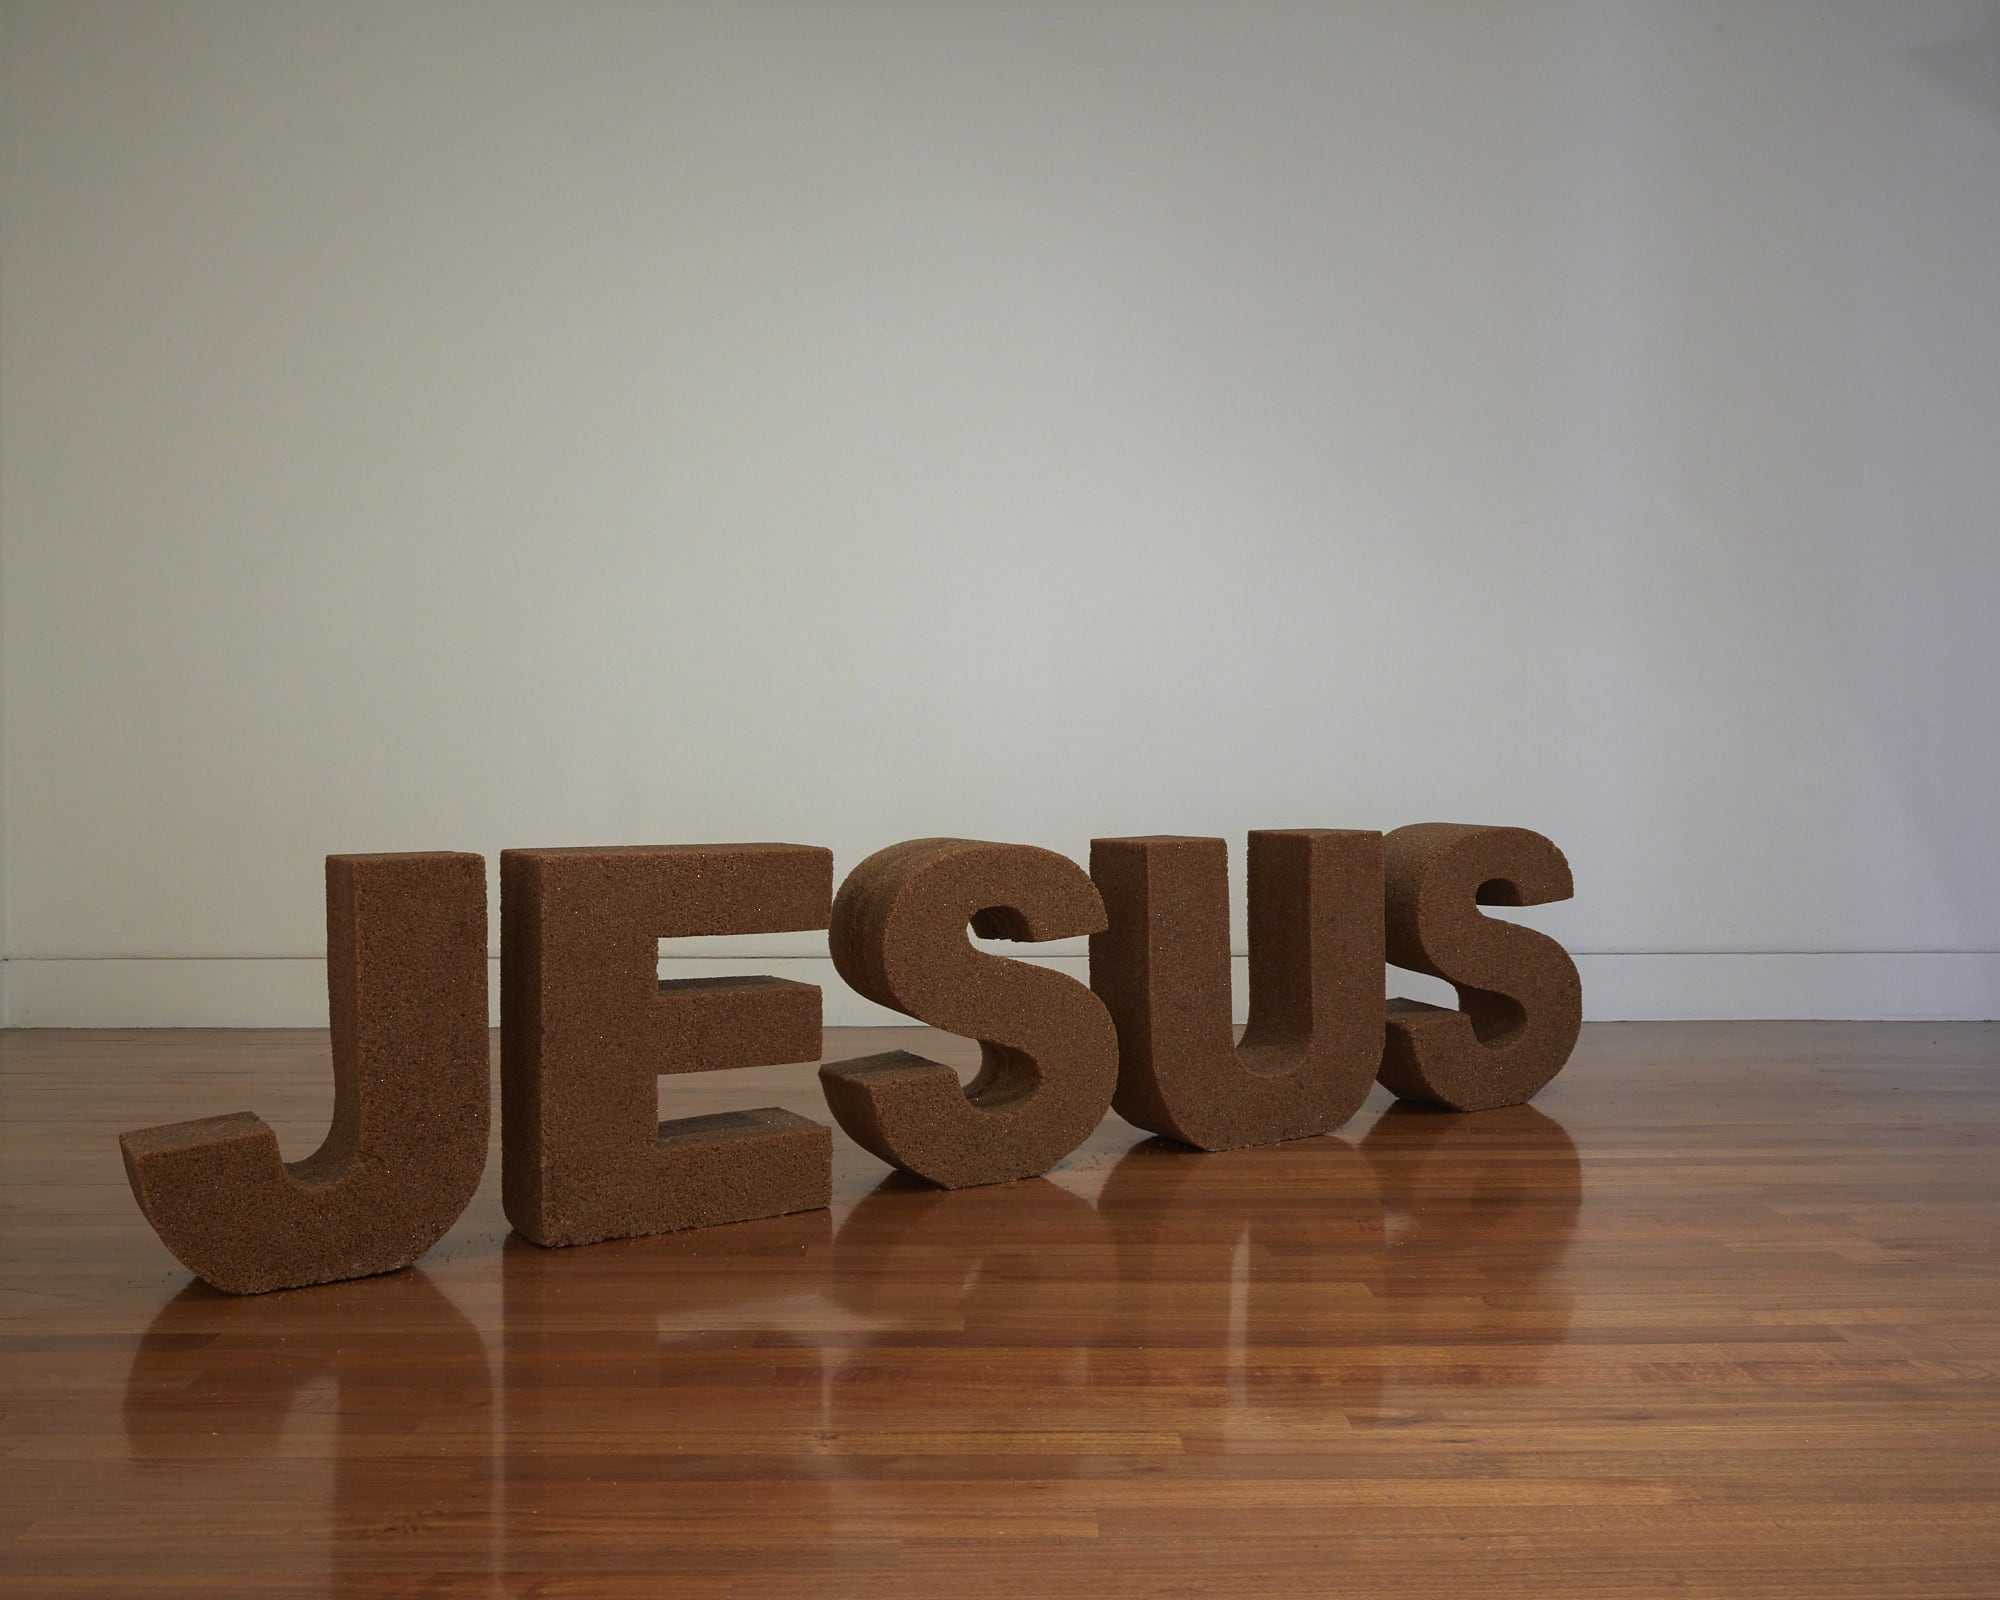 Jasmine Togo-Brisby, Sweet Jesus!, 2018 (install view), unrefined cane sugar & resin, commisioned by Te Tuhi, Auckland, courtesy of the artist and Page Blackie galleryphoto by Sam Harnett.